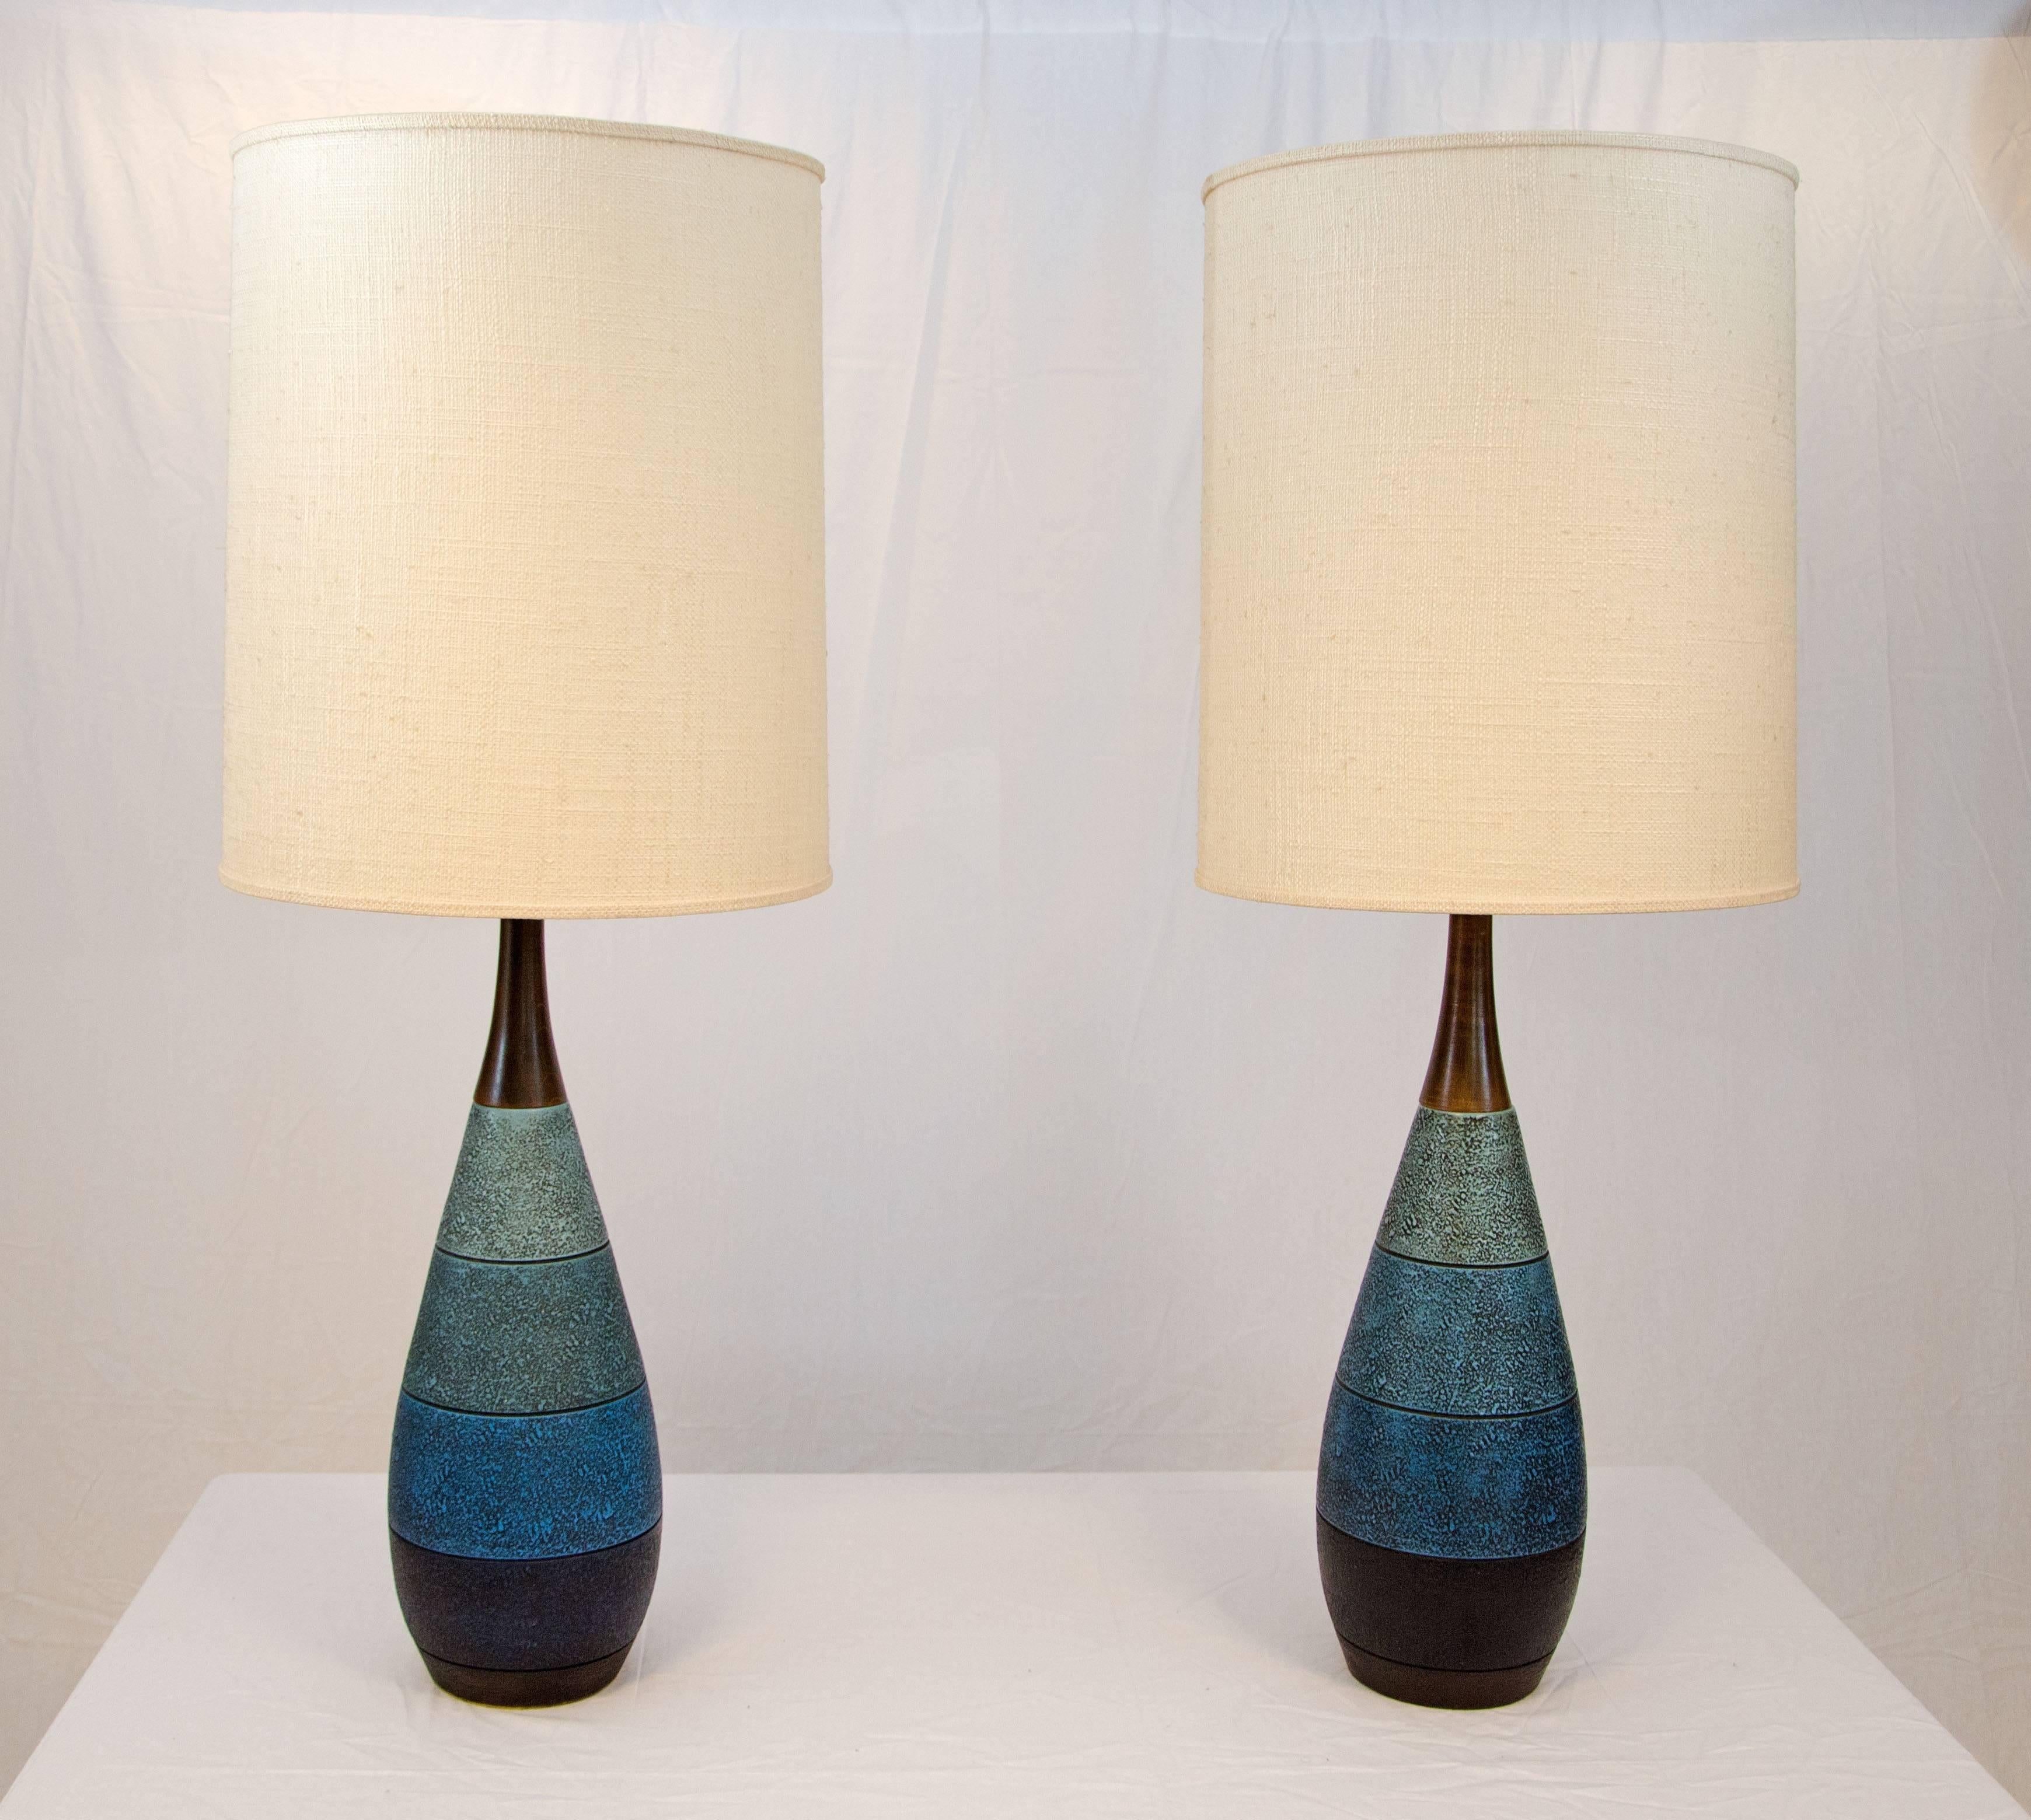 A nice pair of ceramic lamps with original textured fabric shades (thin plastic backing). The ceramic bases are designed with graduated shades of blue and accented with a walnut finished wood. The blue ceramic part of the base is 18